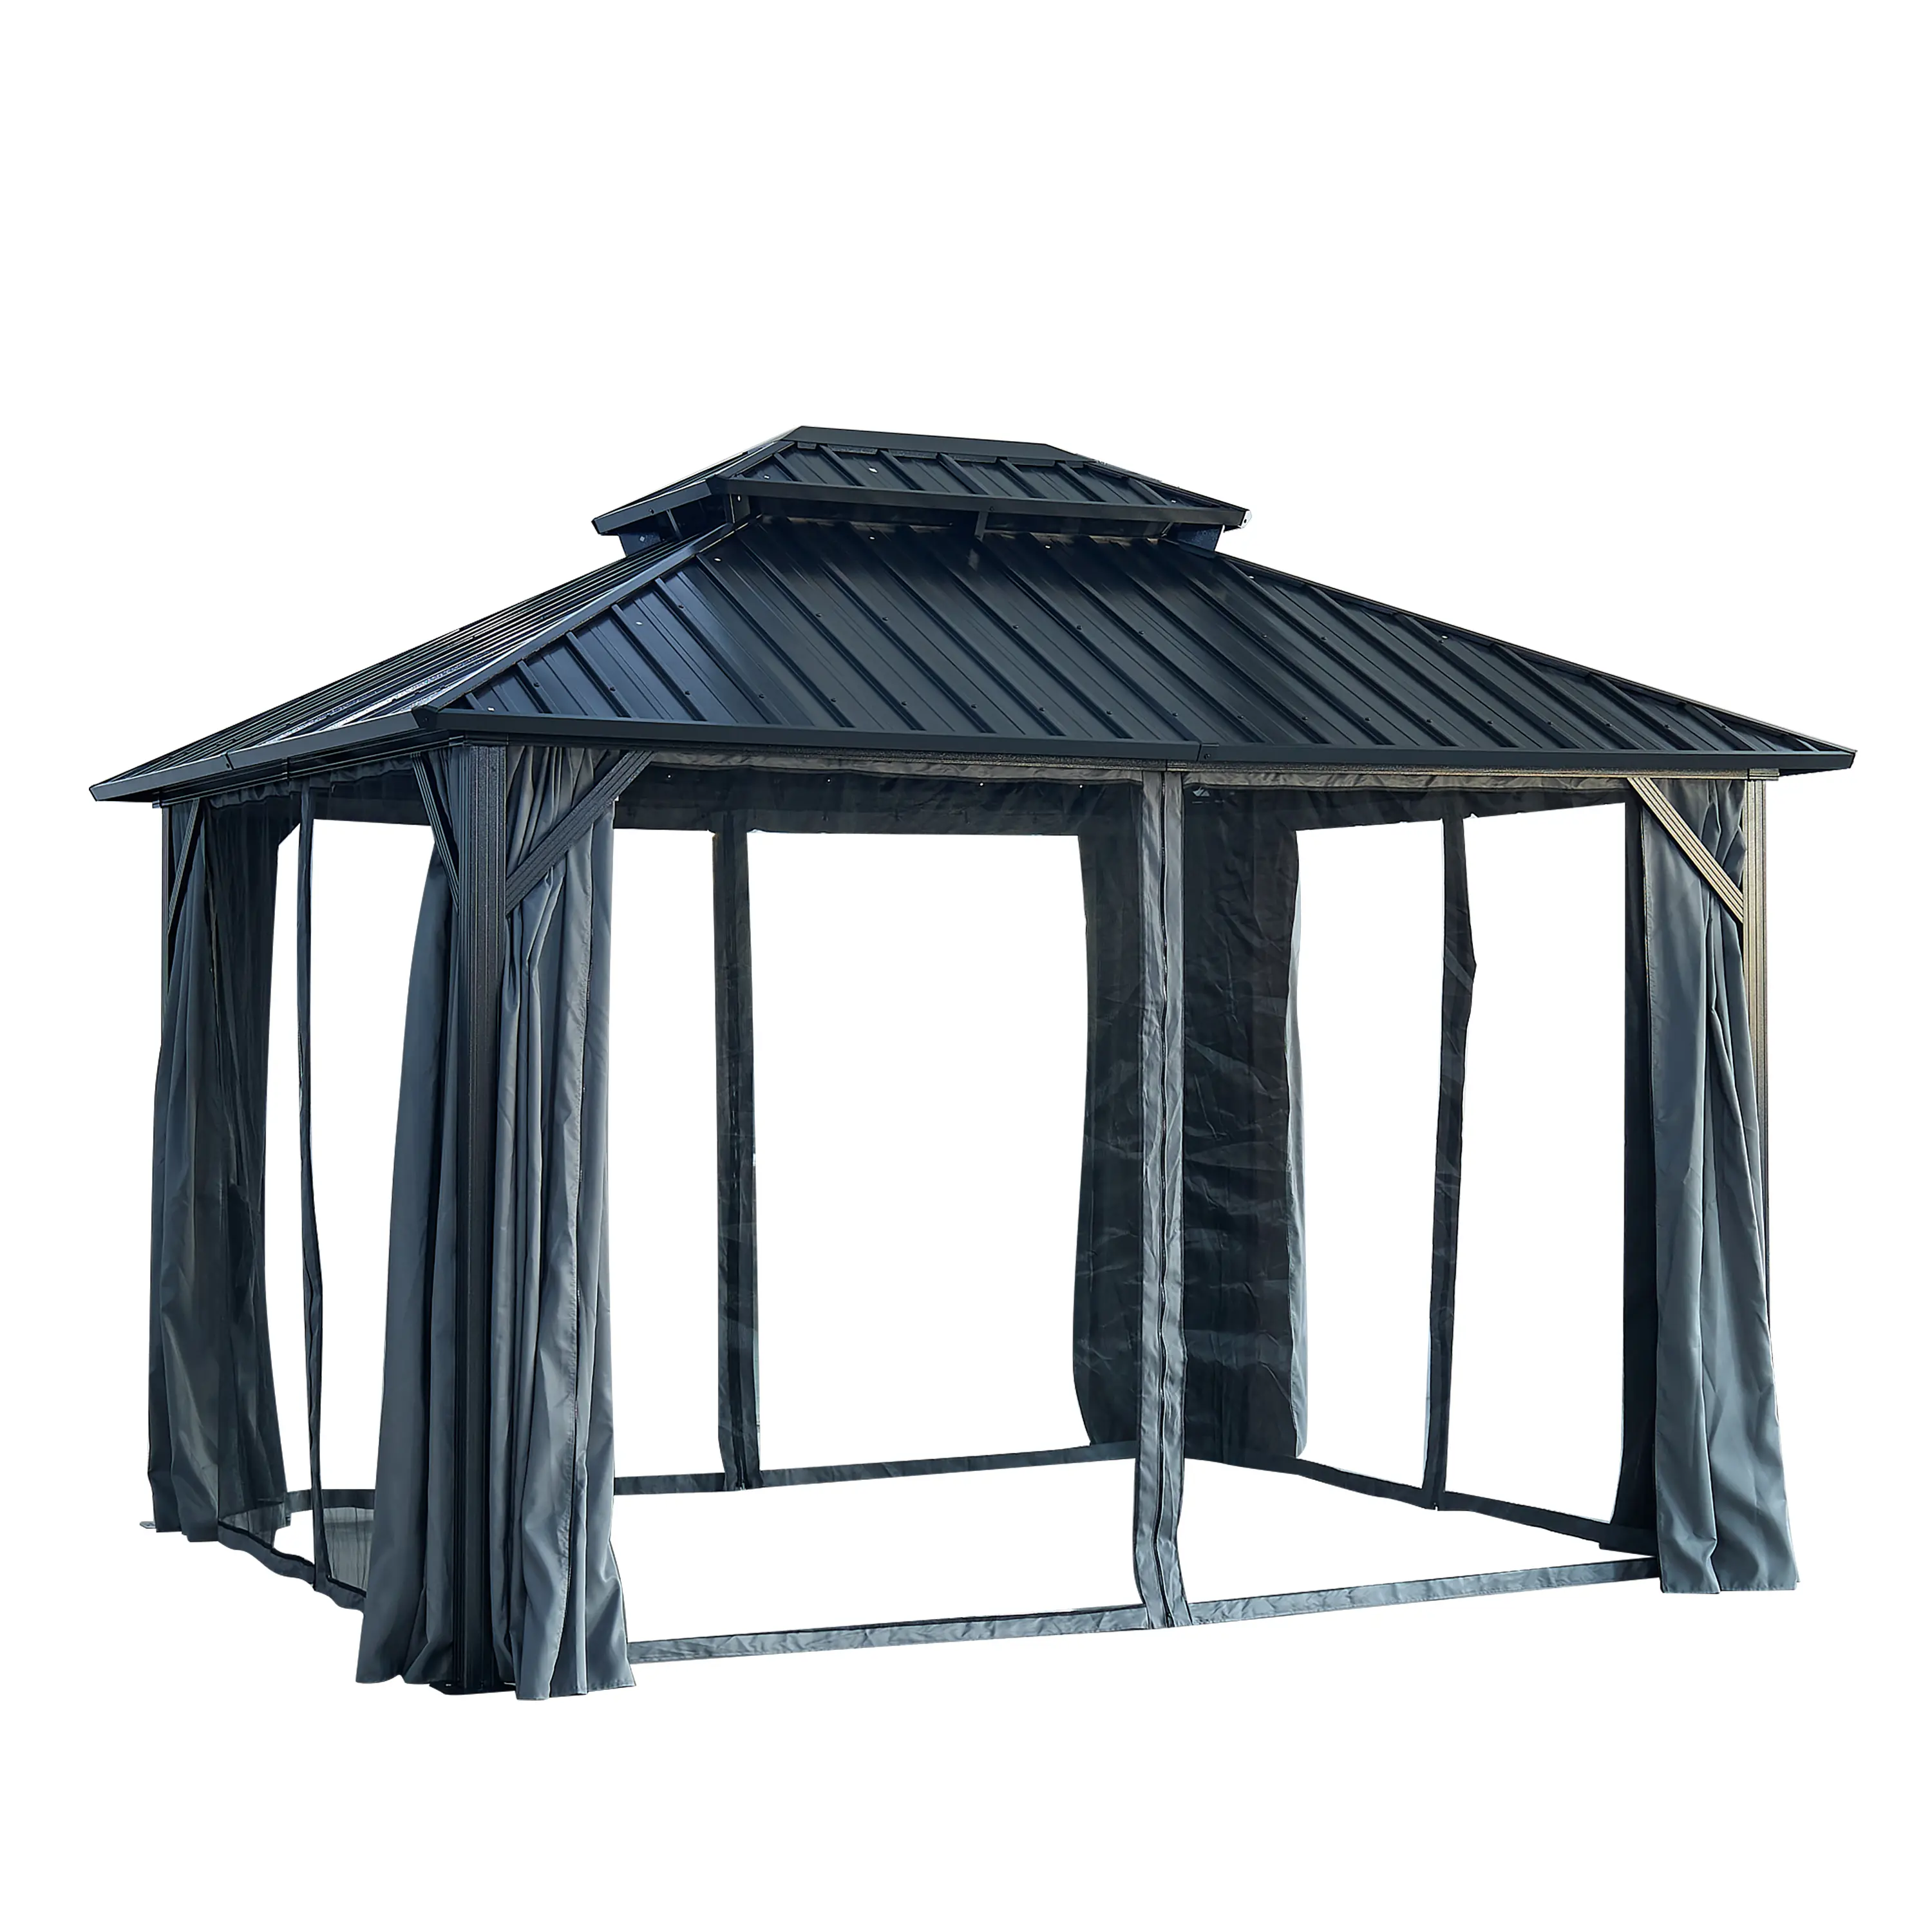 10x12 ft Galvanized Iron Aluminum Frame Double Hardtop Gazebo with Netting and Curtains for Patio